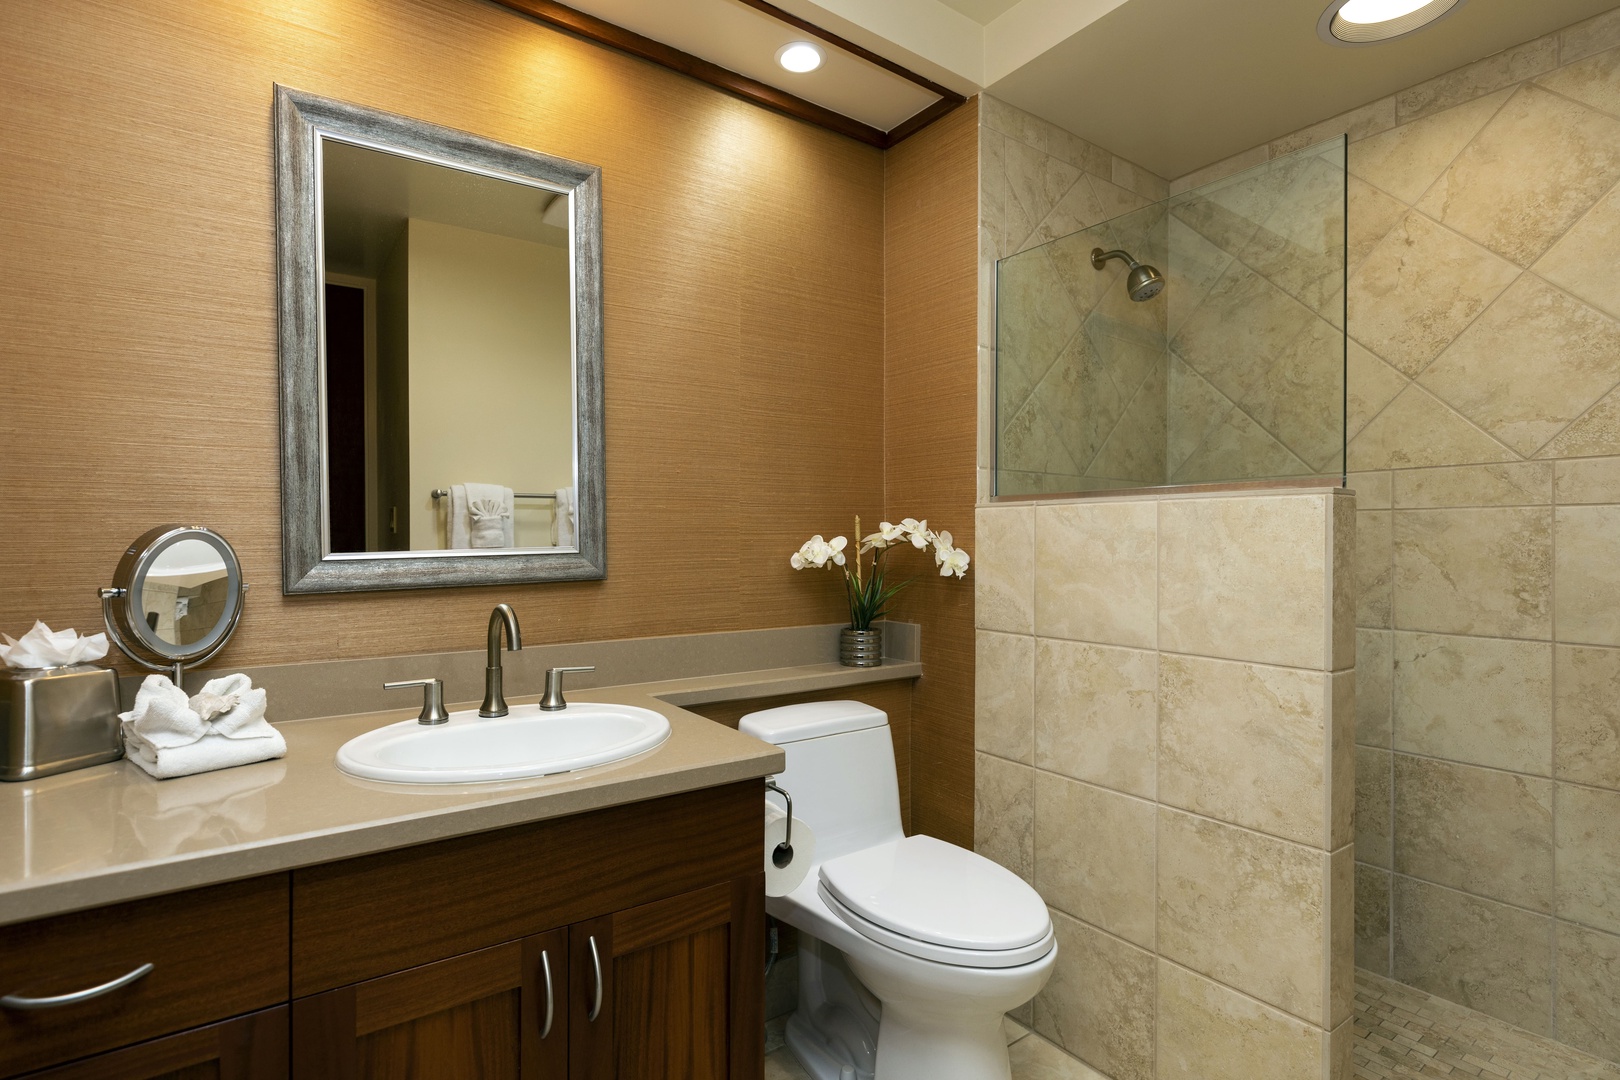 Kamuela Vacation Rentals, Mauna Lani Point E105 - The guest bathroom offers a walk-in shower.